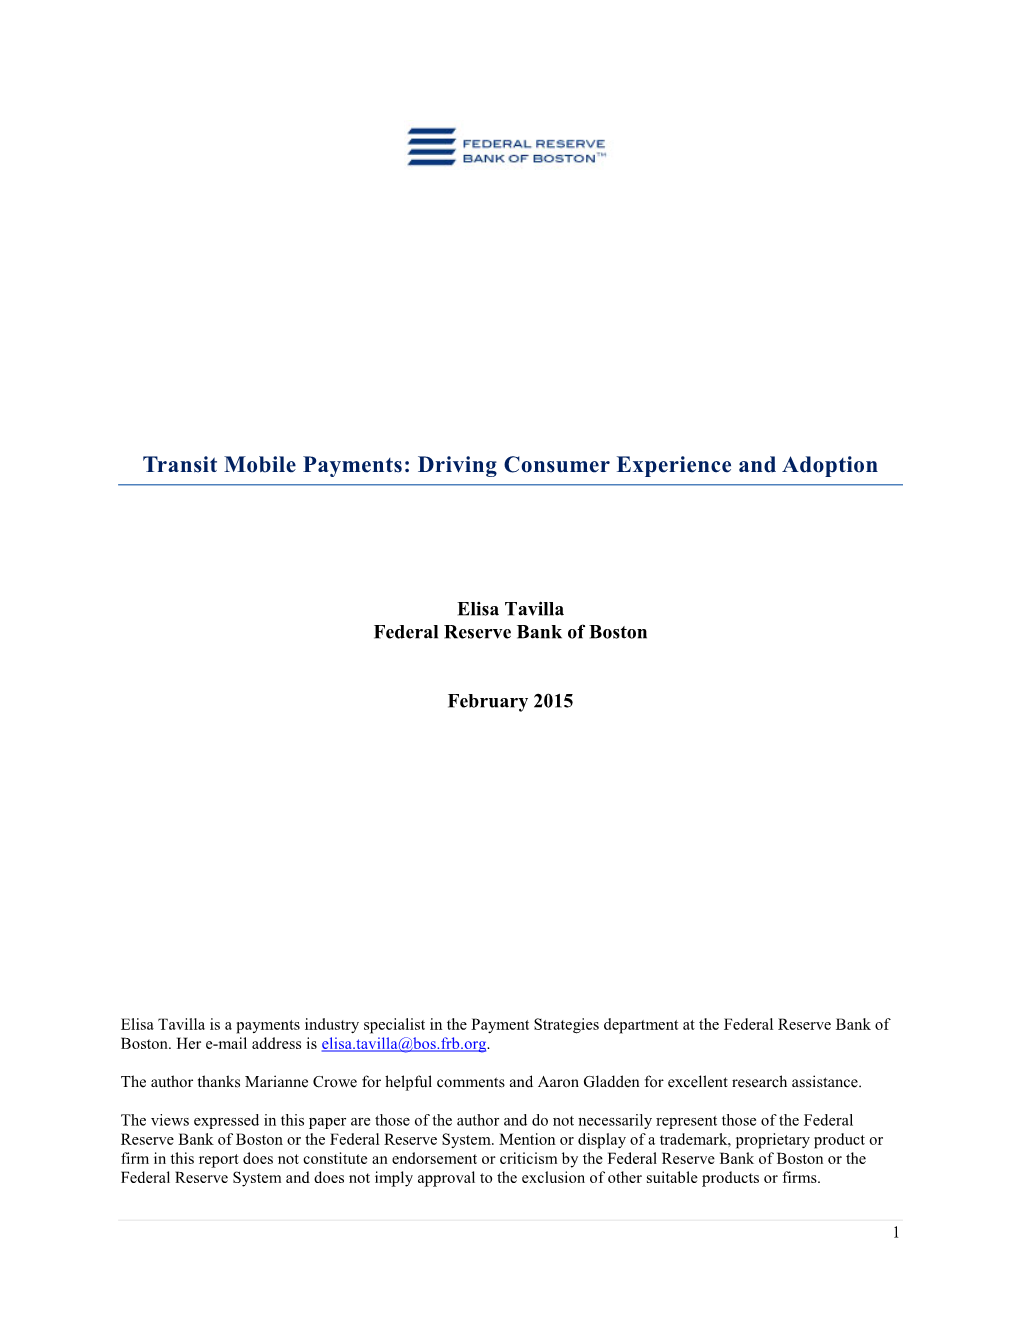 Transit Mobile Payments: Driving Consumer Experience and Adoption